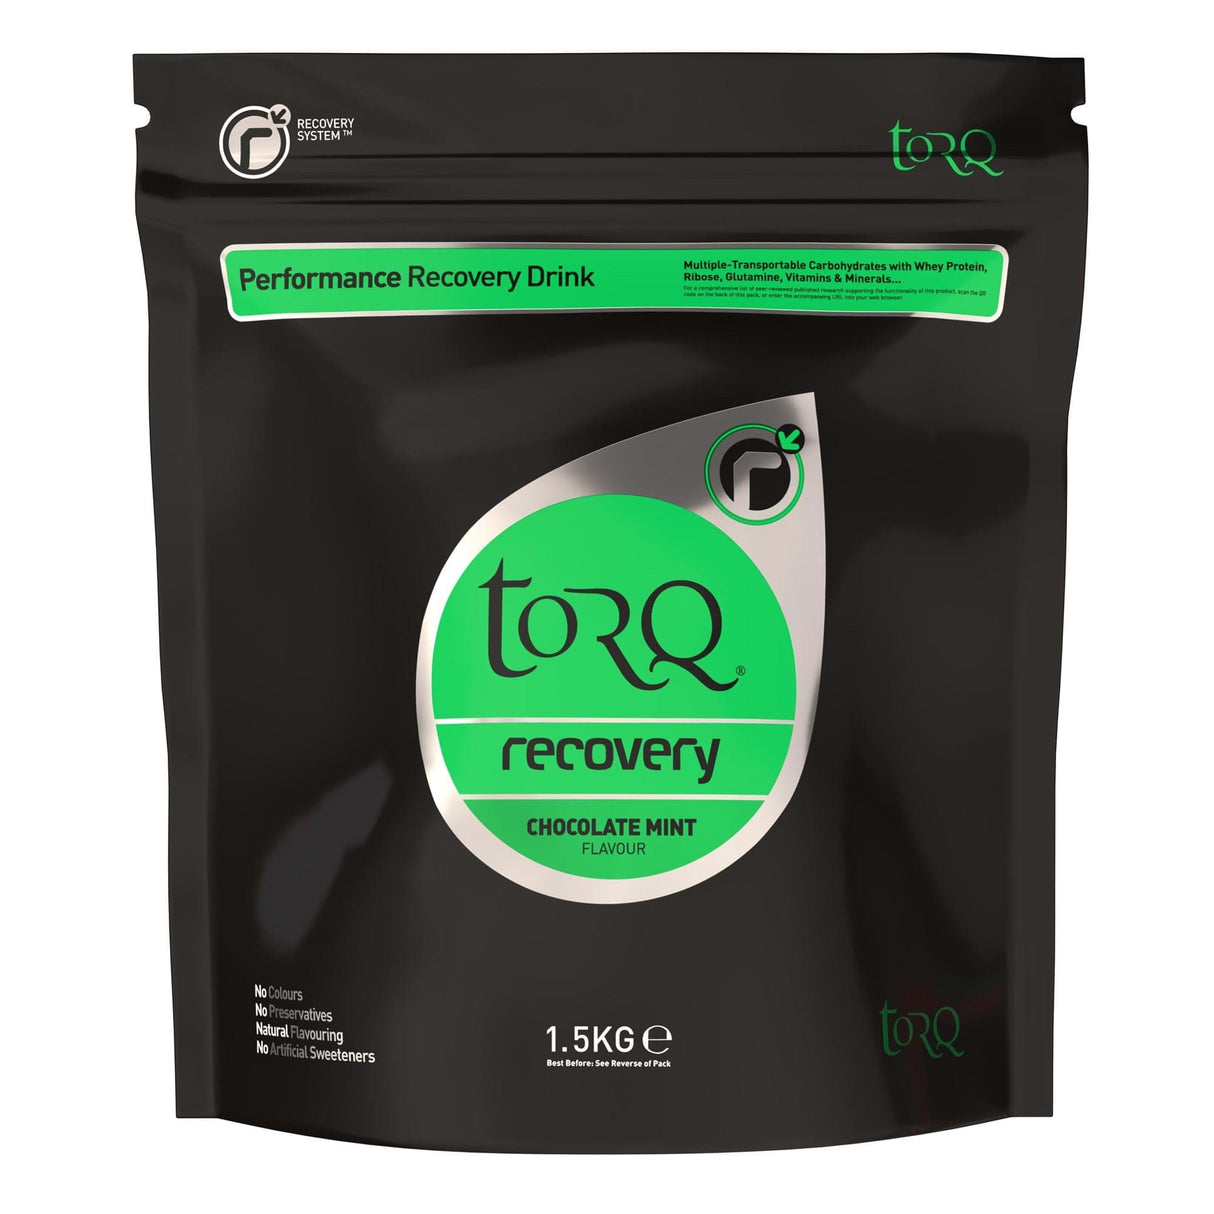 Torq Recovery Drink (1 X 1.5Kg): Chocolate Mint